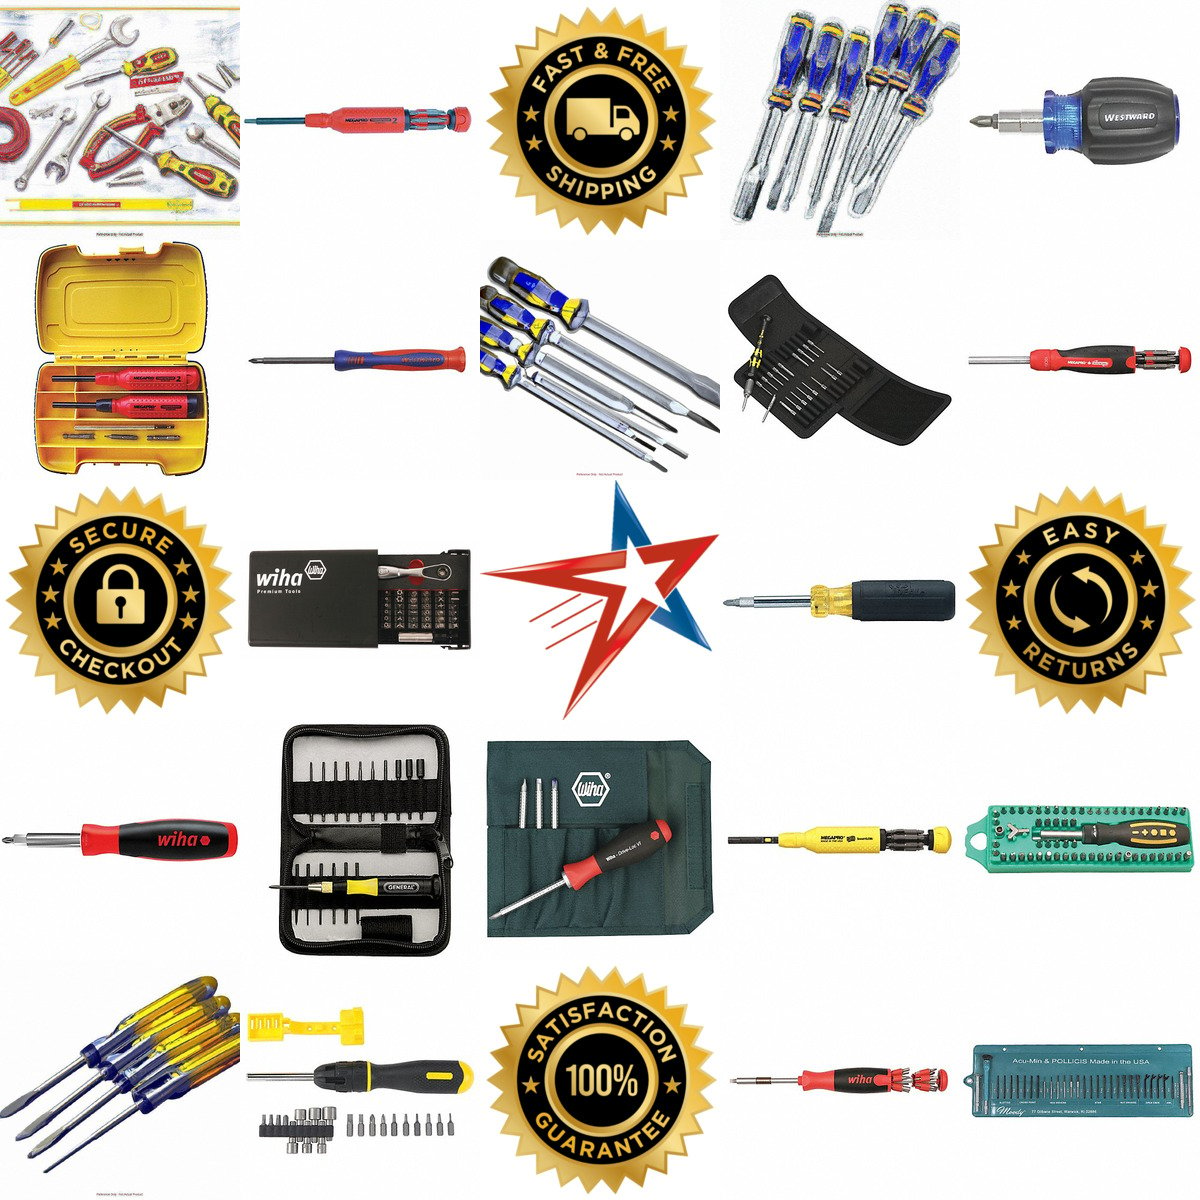 A selection of Multi Bit Screwdrivers products on GoVets